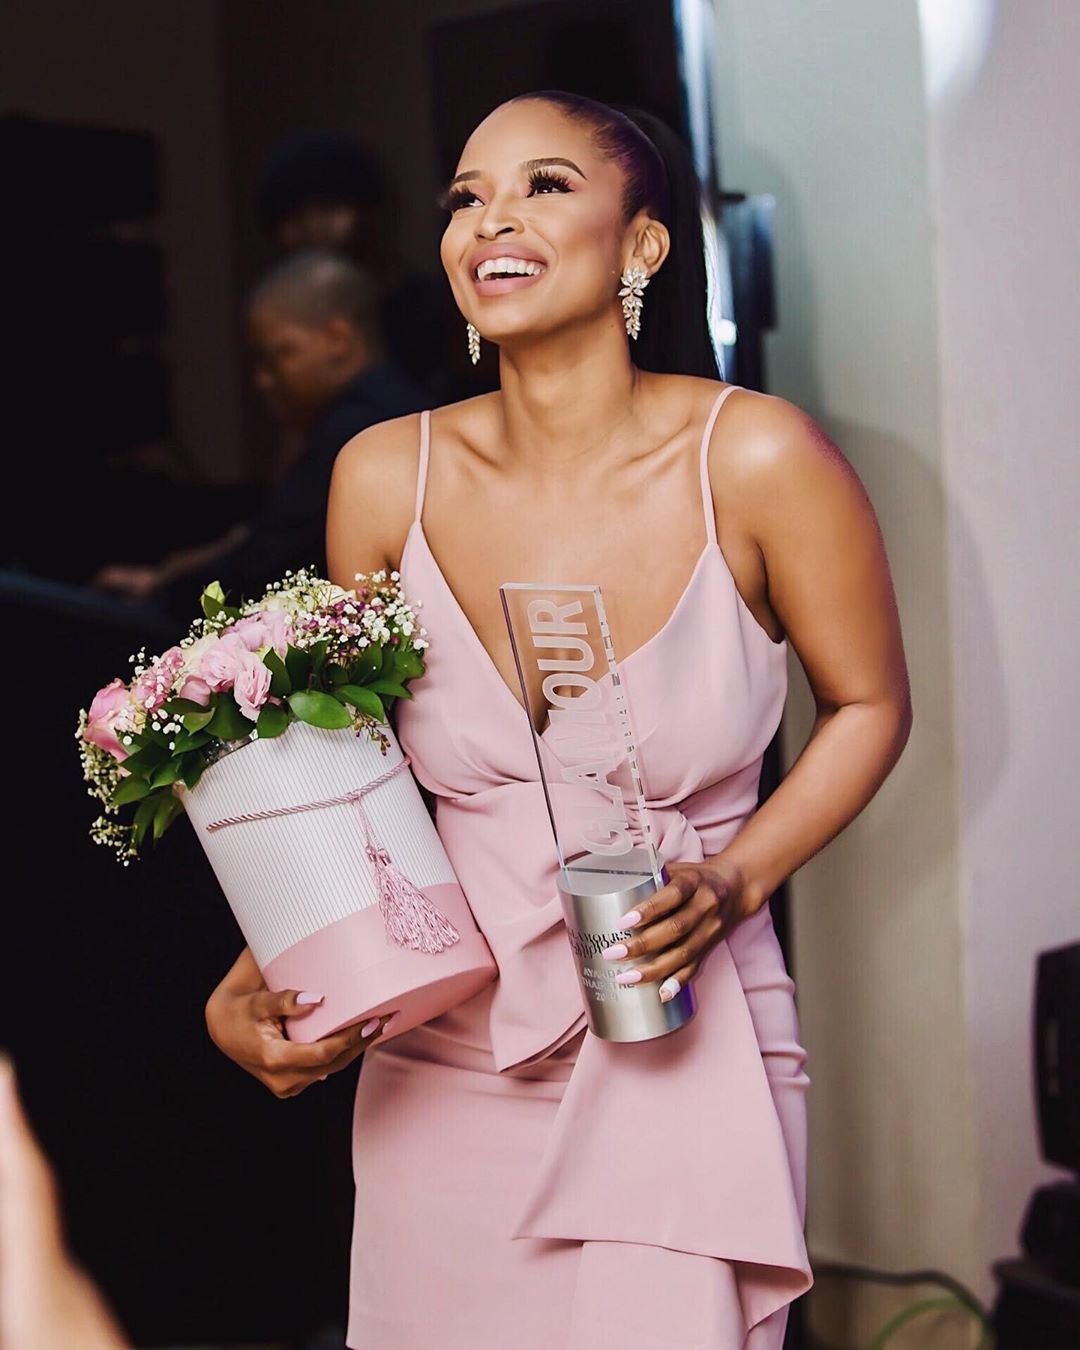 https://www.bellanaijastyle.com/wp-content/uploads/2019/09/See-All-The-Honourees-From-The-2019-SA-Glamours-Most-Glamorous-Women-Awards-2.jpg